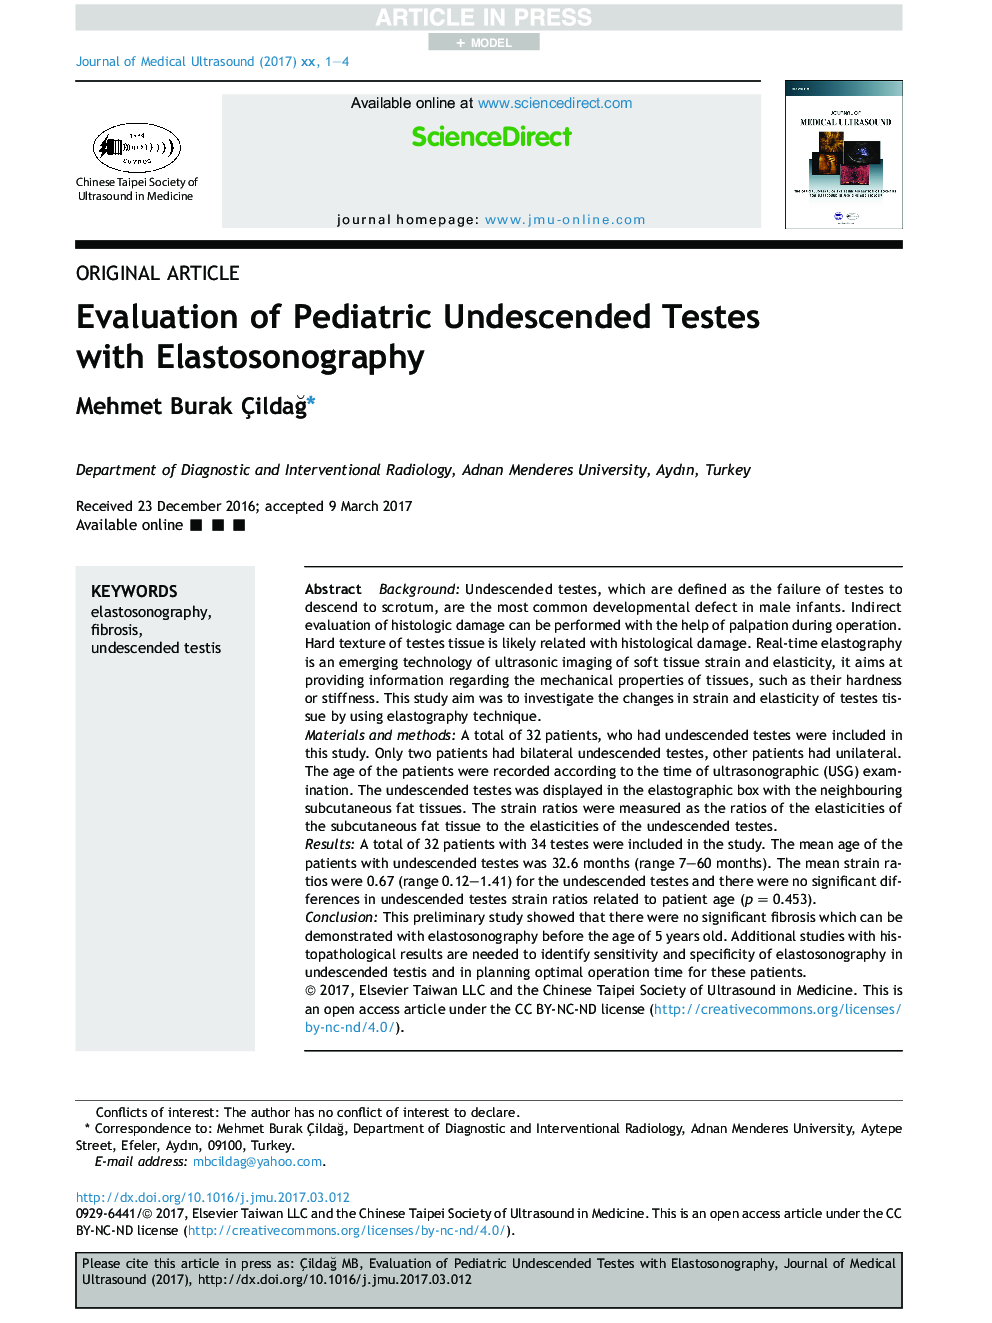 Evaluation of Pediatric Undescended Testes with Elastosonography